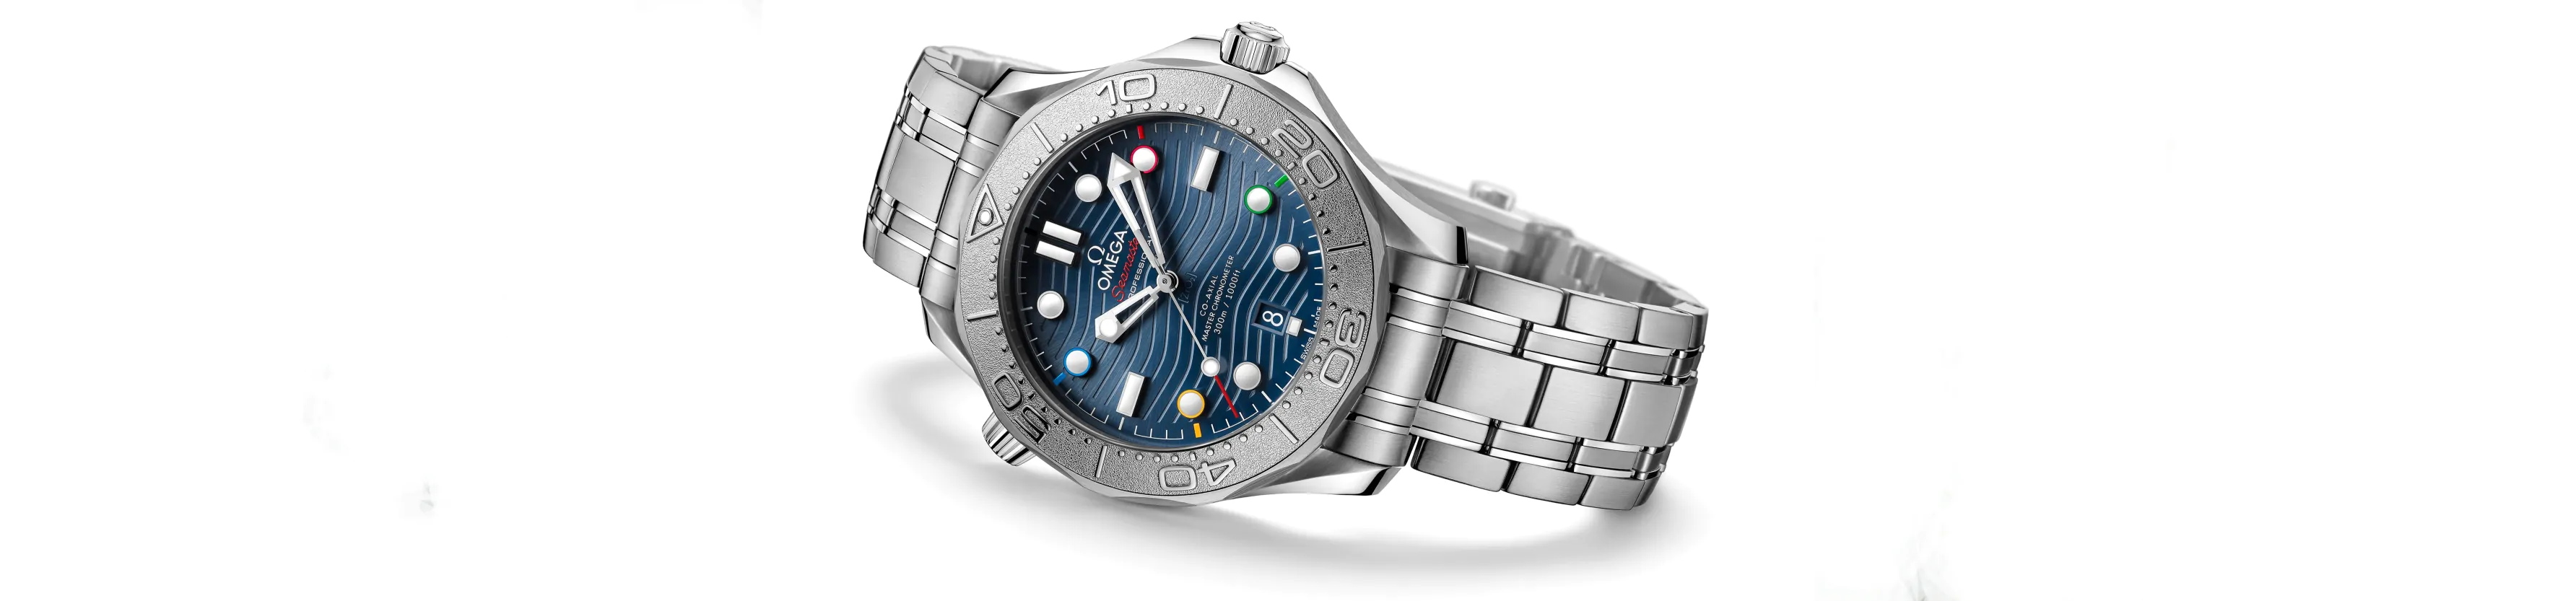 Introducing the OMEGA Seamaster Diver 300m “Beijing 2022” Special Edition